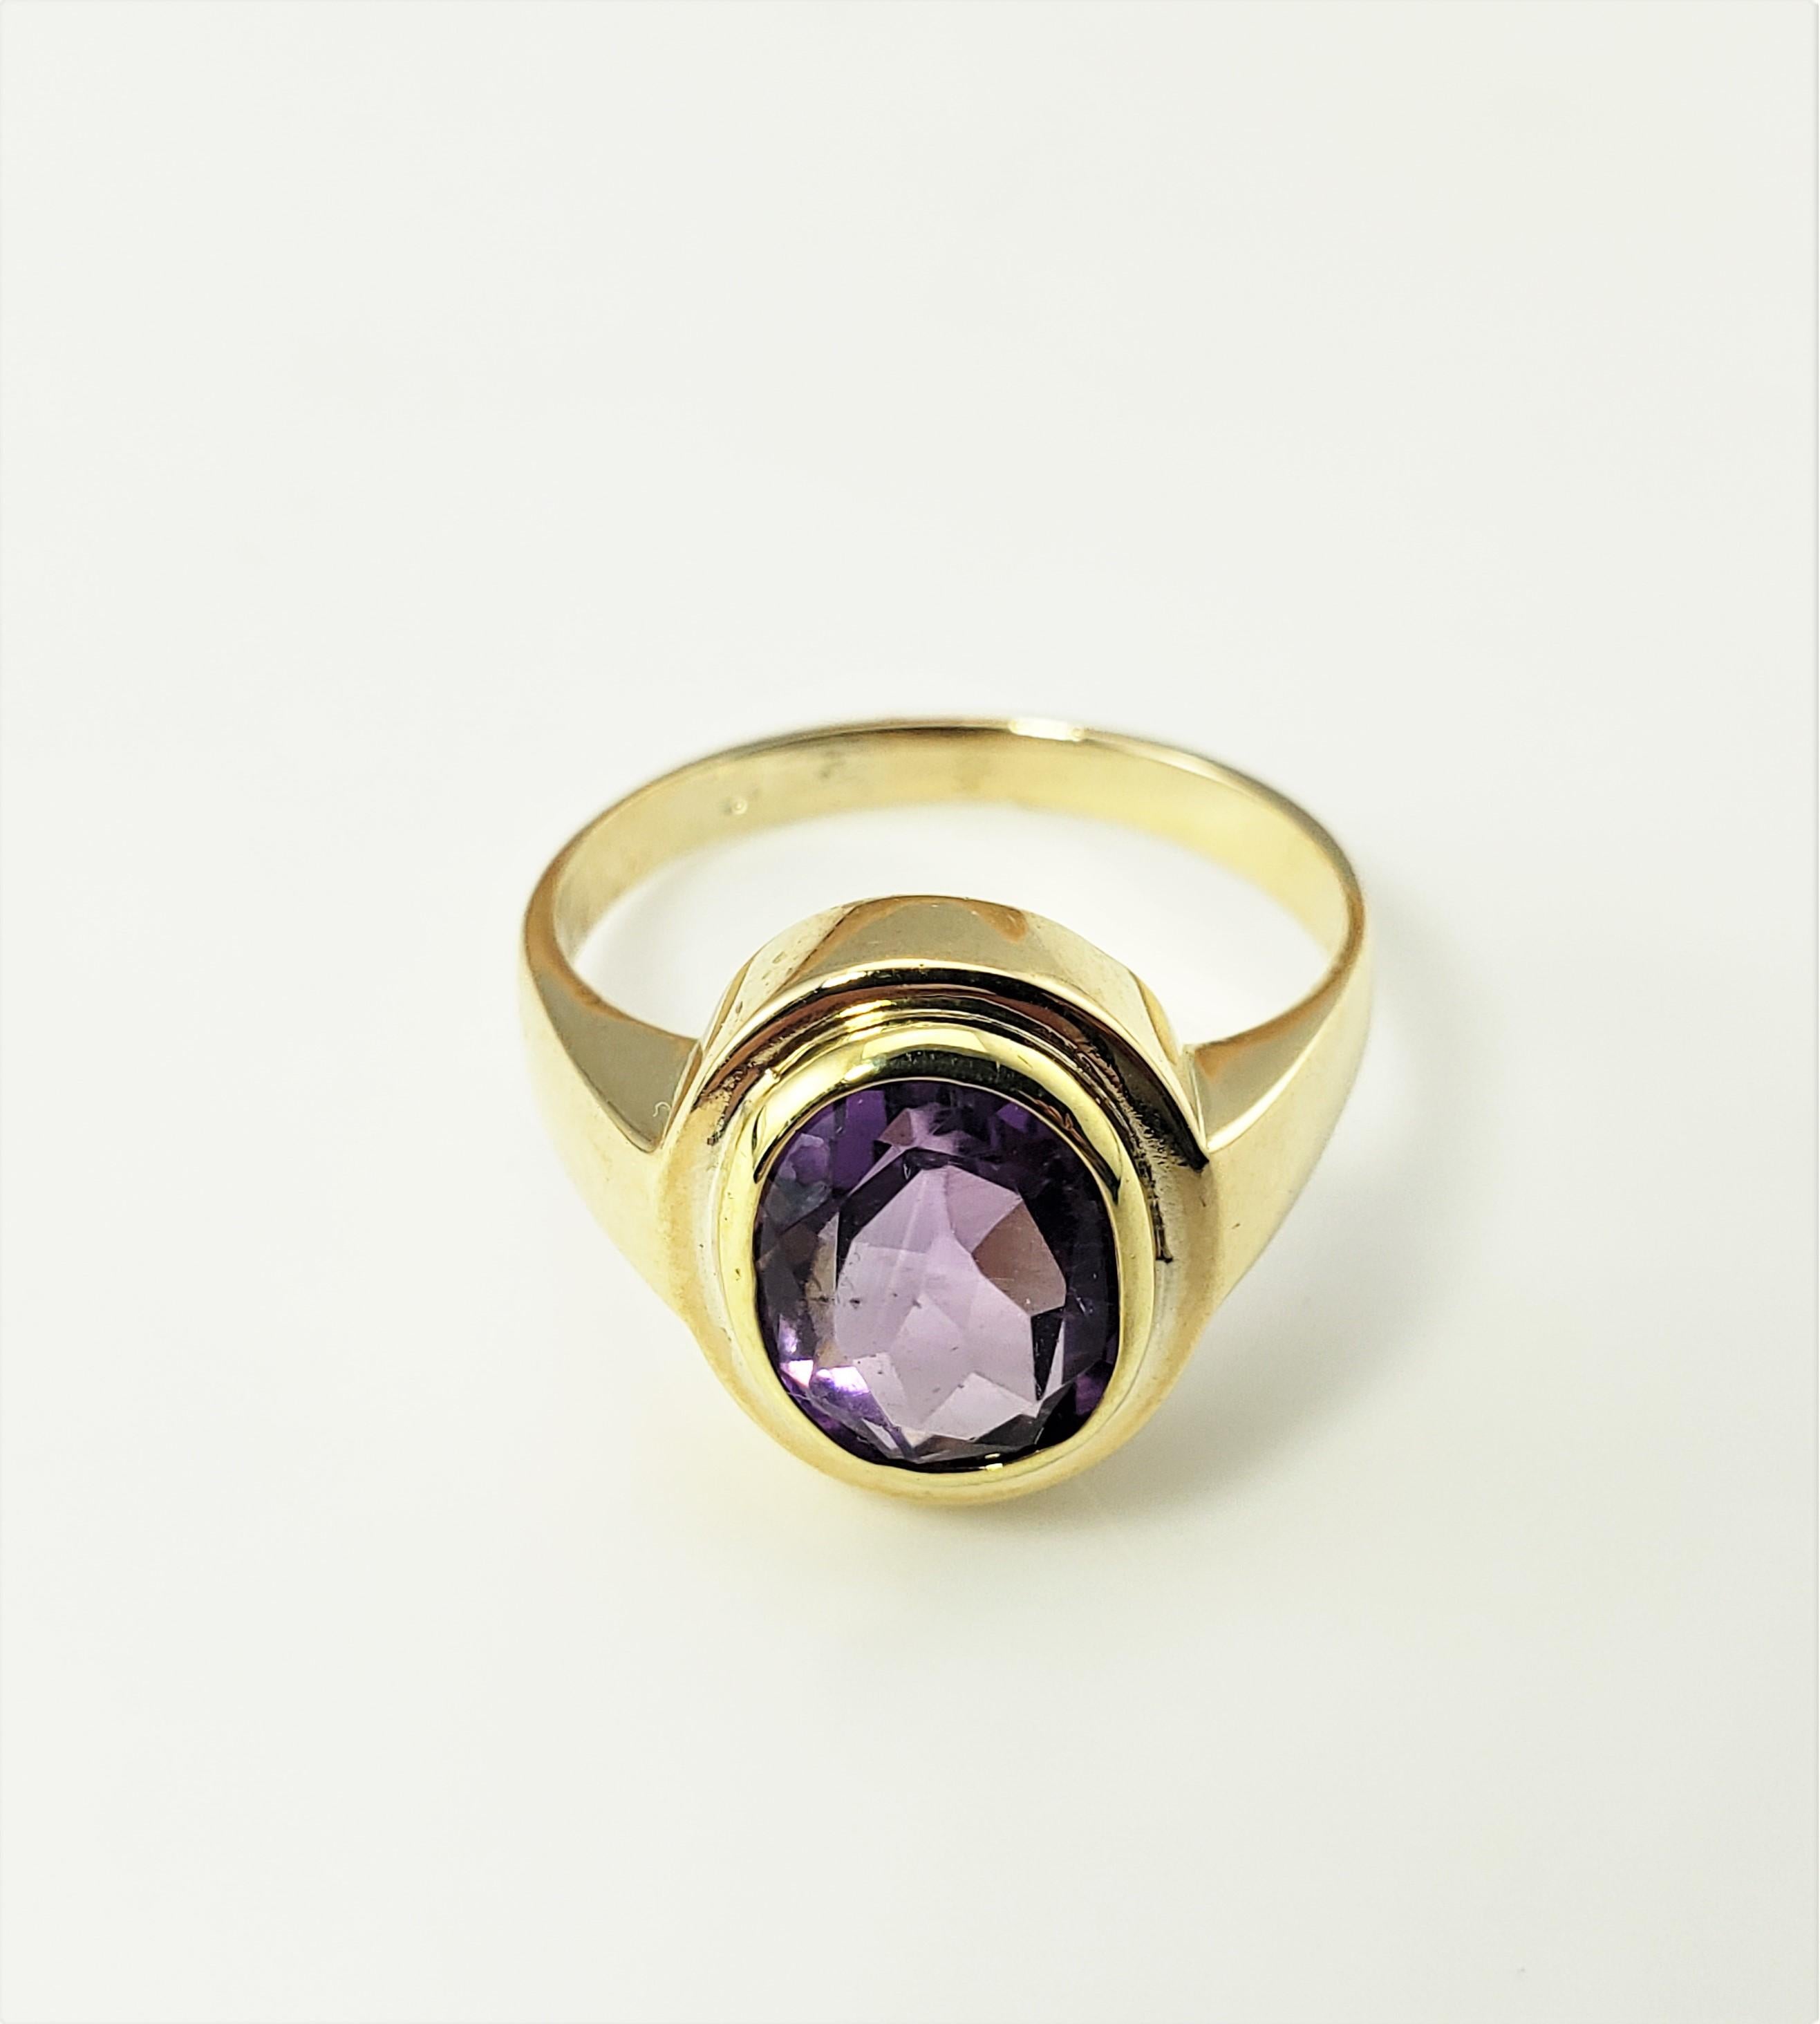 14 Karat Yellow Gold Amethyst Ring Size 6.25-

This lovely ring features one oval amethyst stone (10 mm x 8 mm) set in classic 14K yellow gold.  Top of ring measures 12 mm x 10 mm. Shank:  2 mm.

Size: 6.25

Weight:  2.9 dwt. /  4.6 gr.

Stamped: